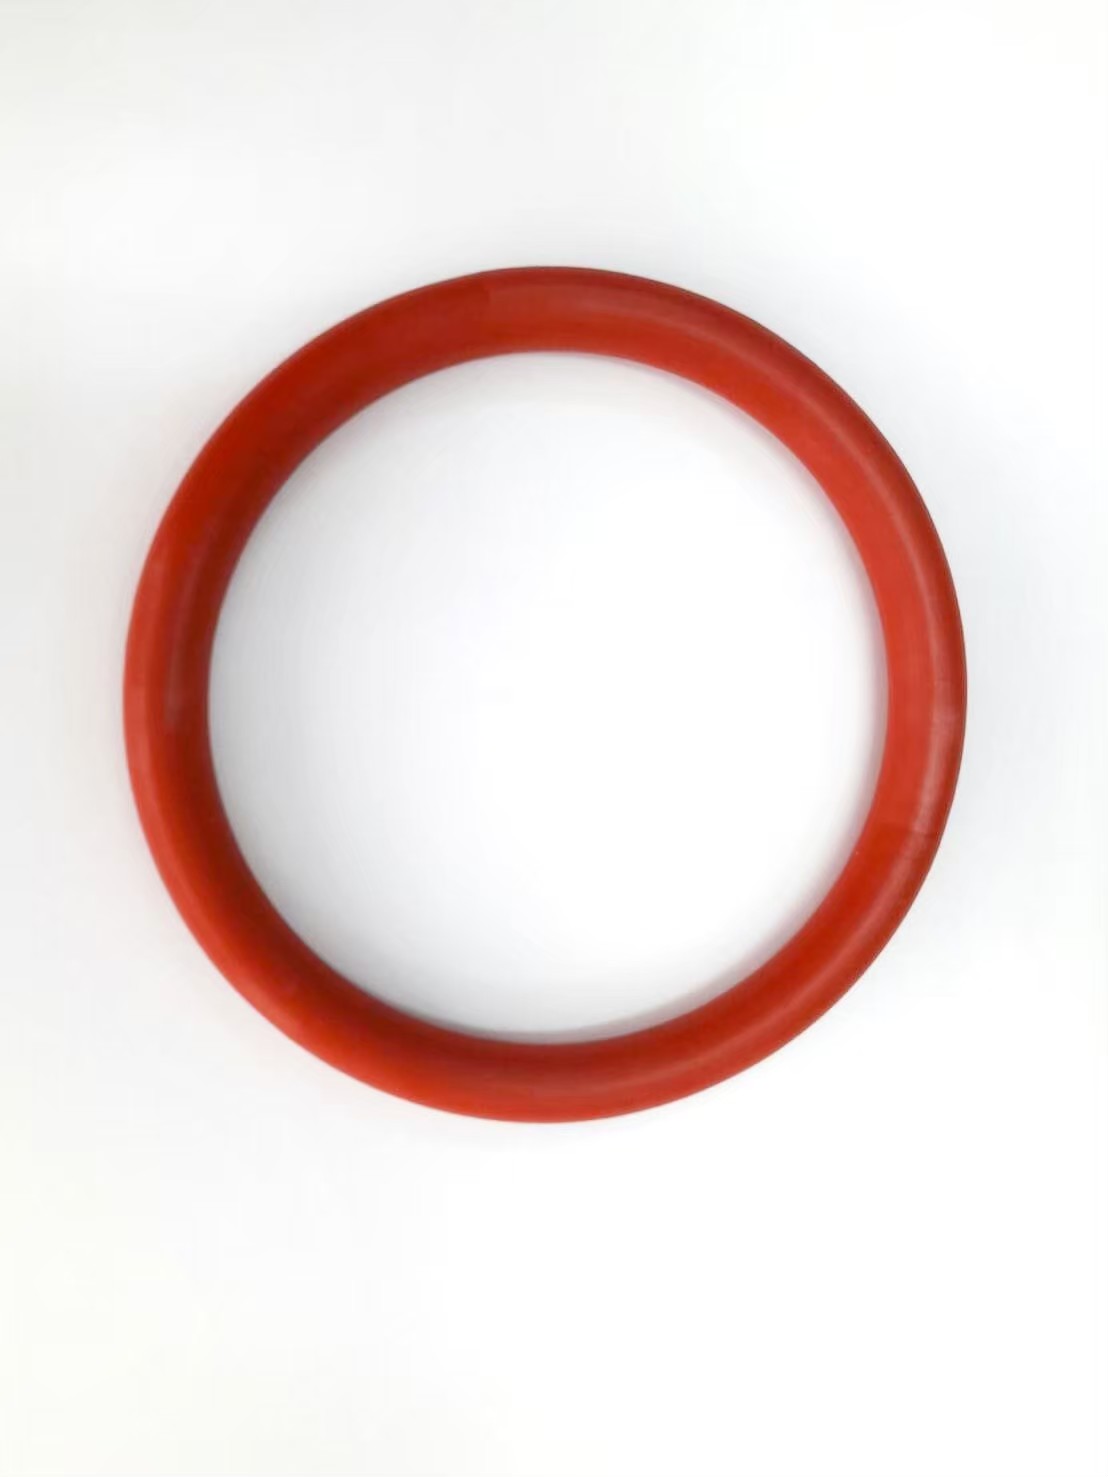 O-Ring Rubber